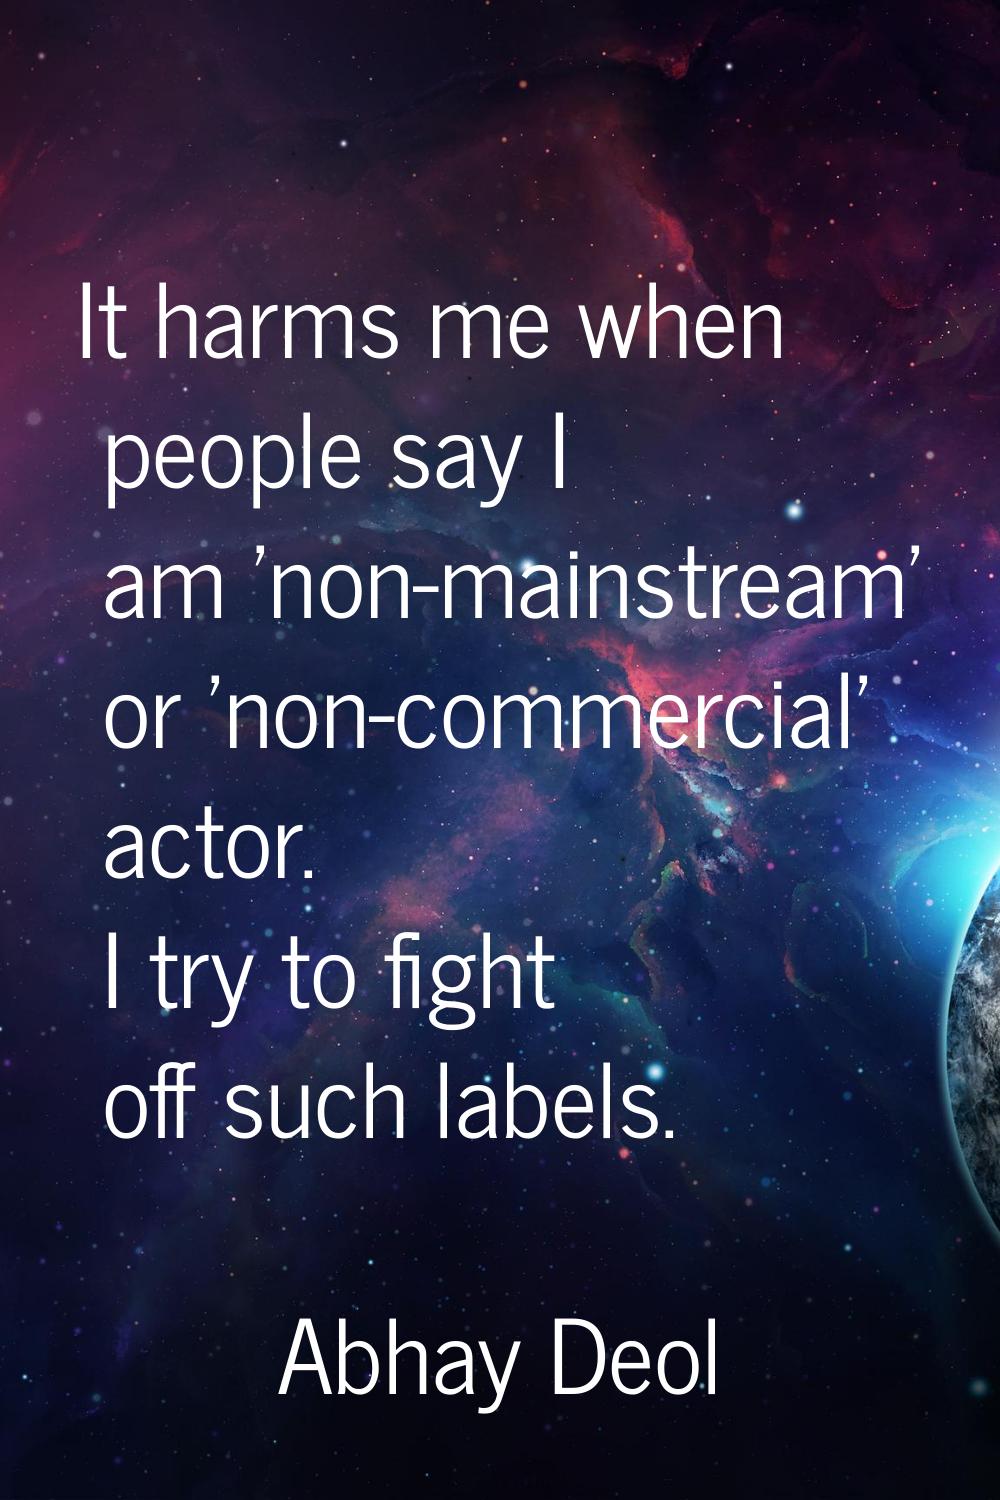 It harms me when people say I am 'non-mainstream' or 'non-commercial' actor. I try to fight off suc